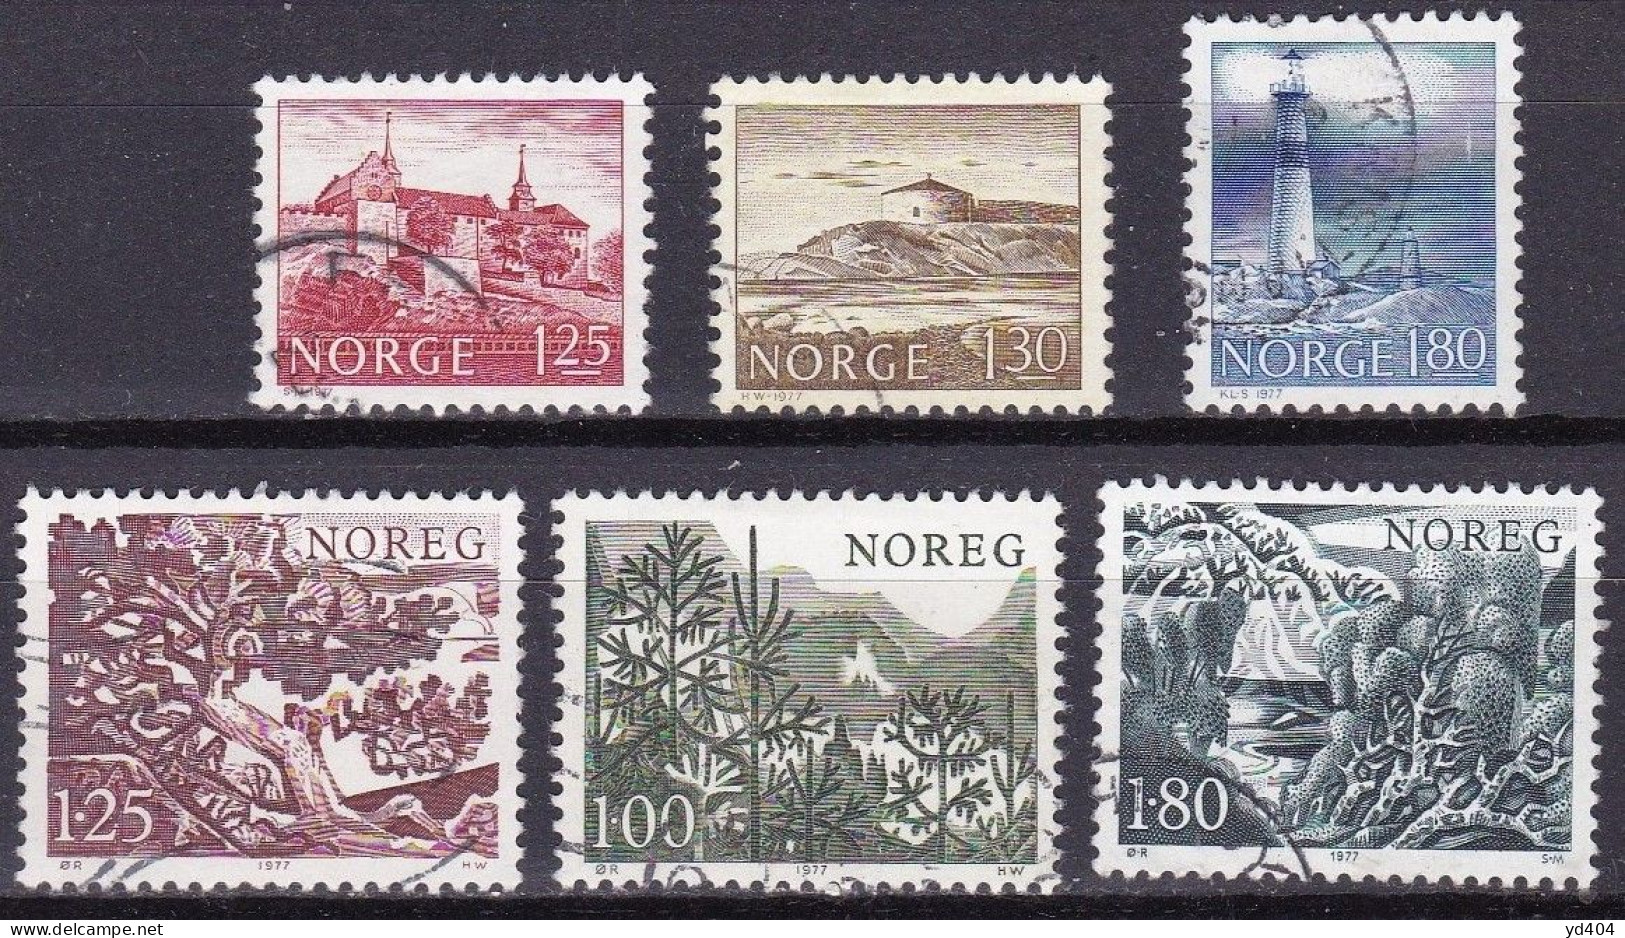 NO091B – NORVEGE - NORWAY – 1977 – FULL YEAR SET – Y&T # 693/713 USED 14,55 € - Used Stamps